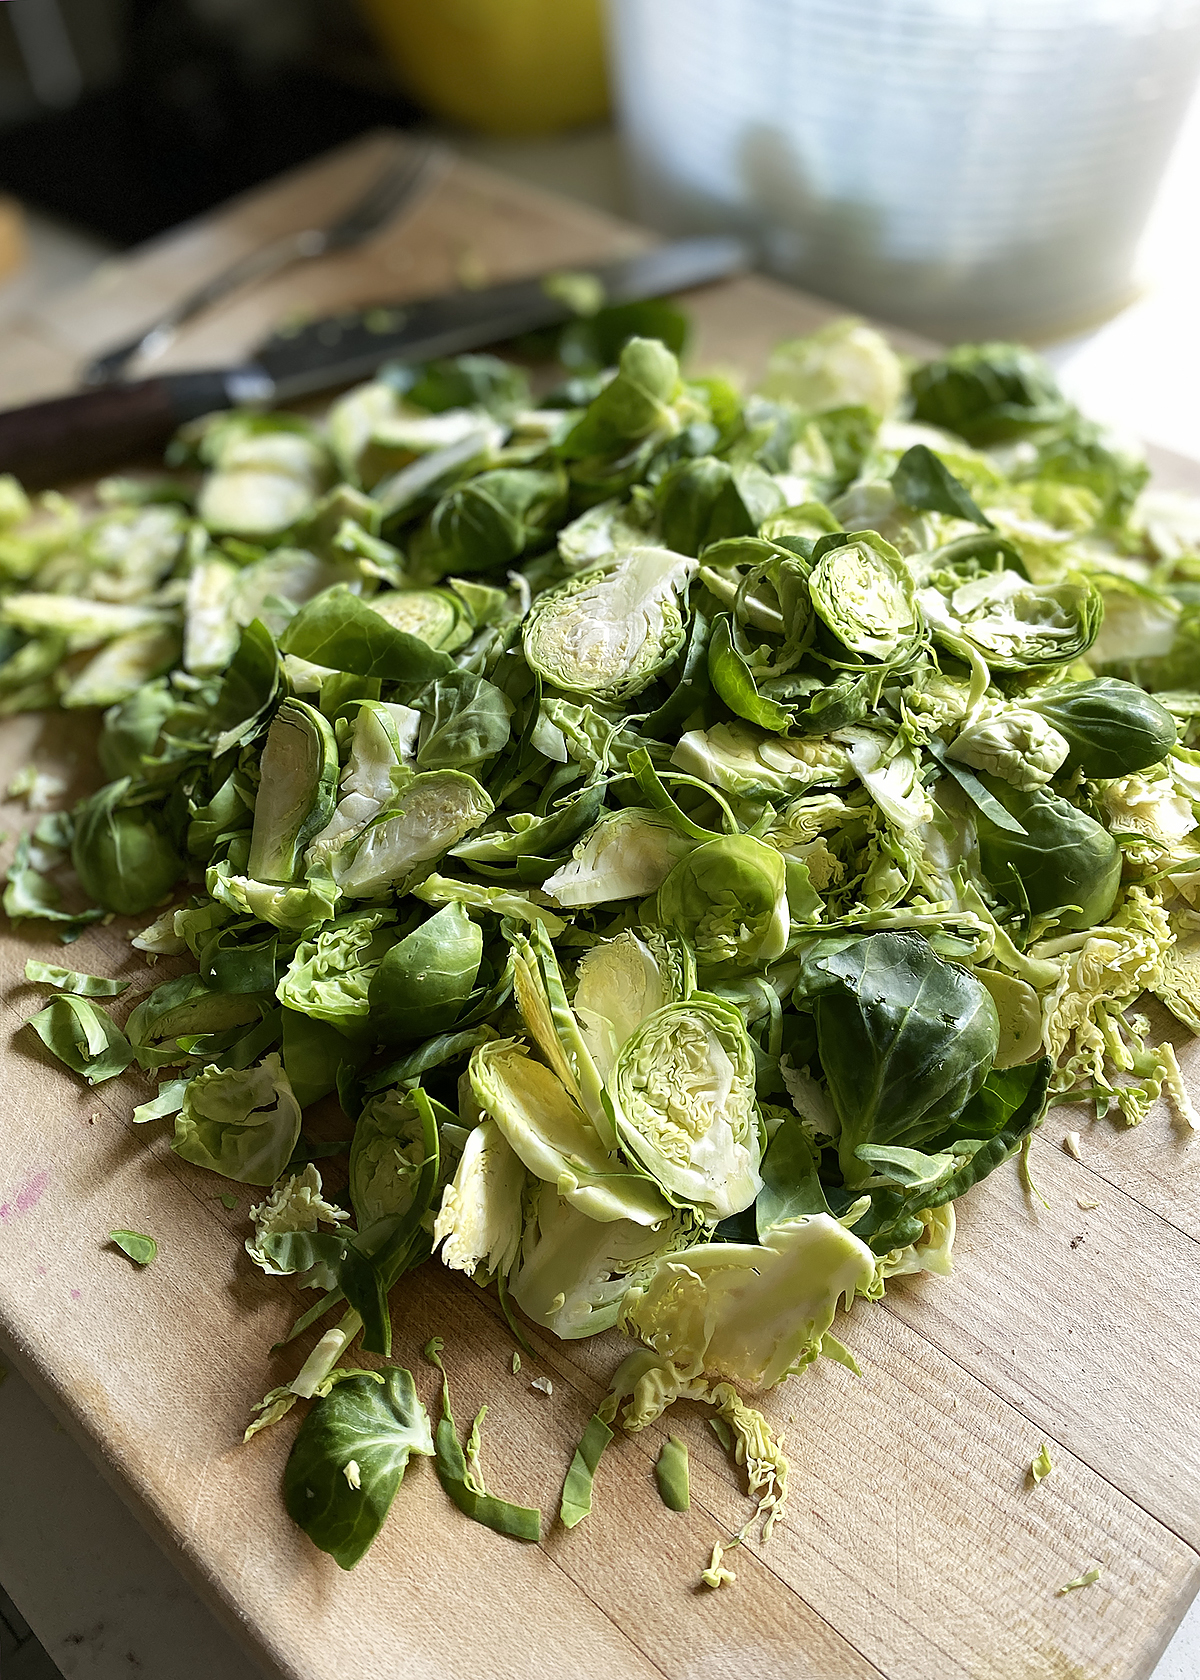 brussels sprouts shredded on cutting board